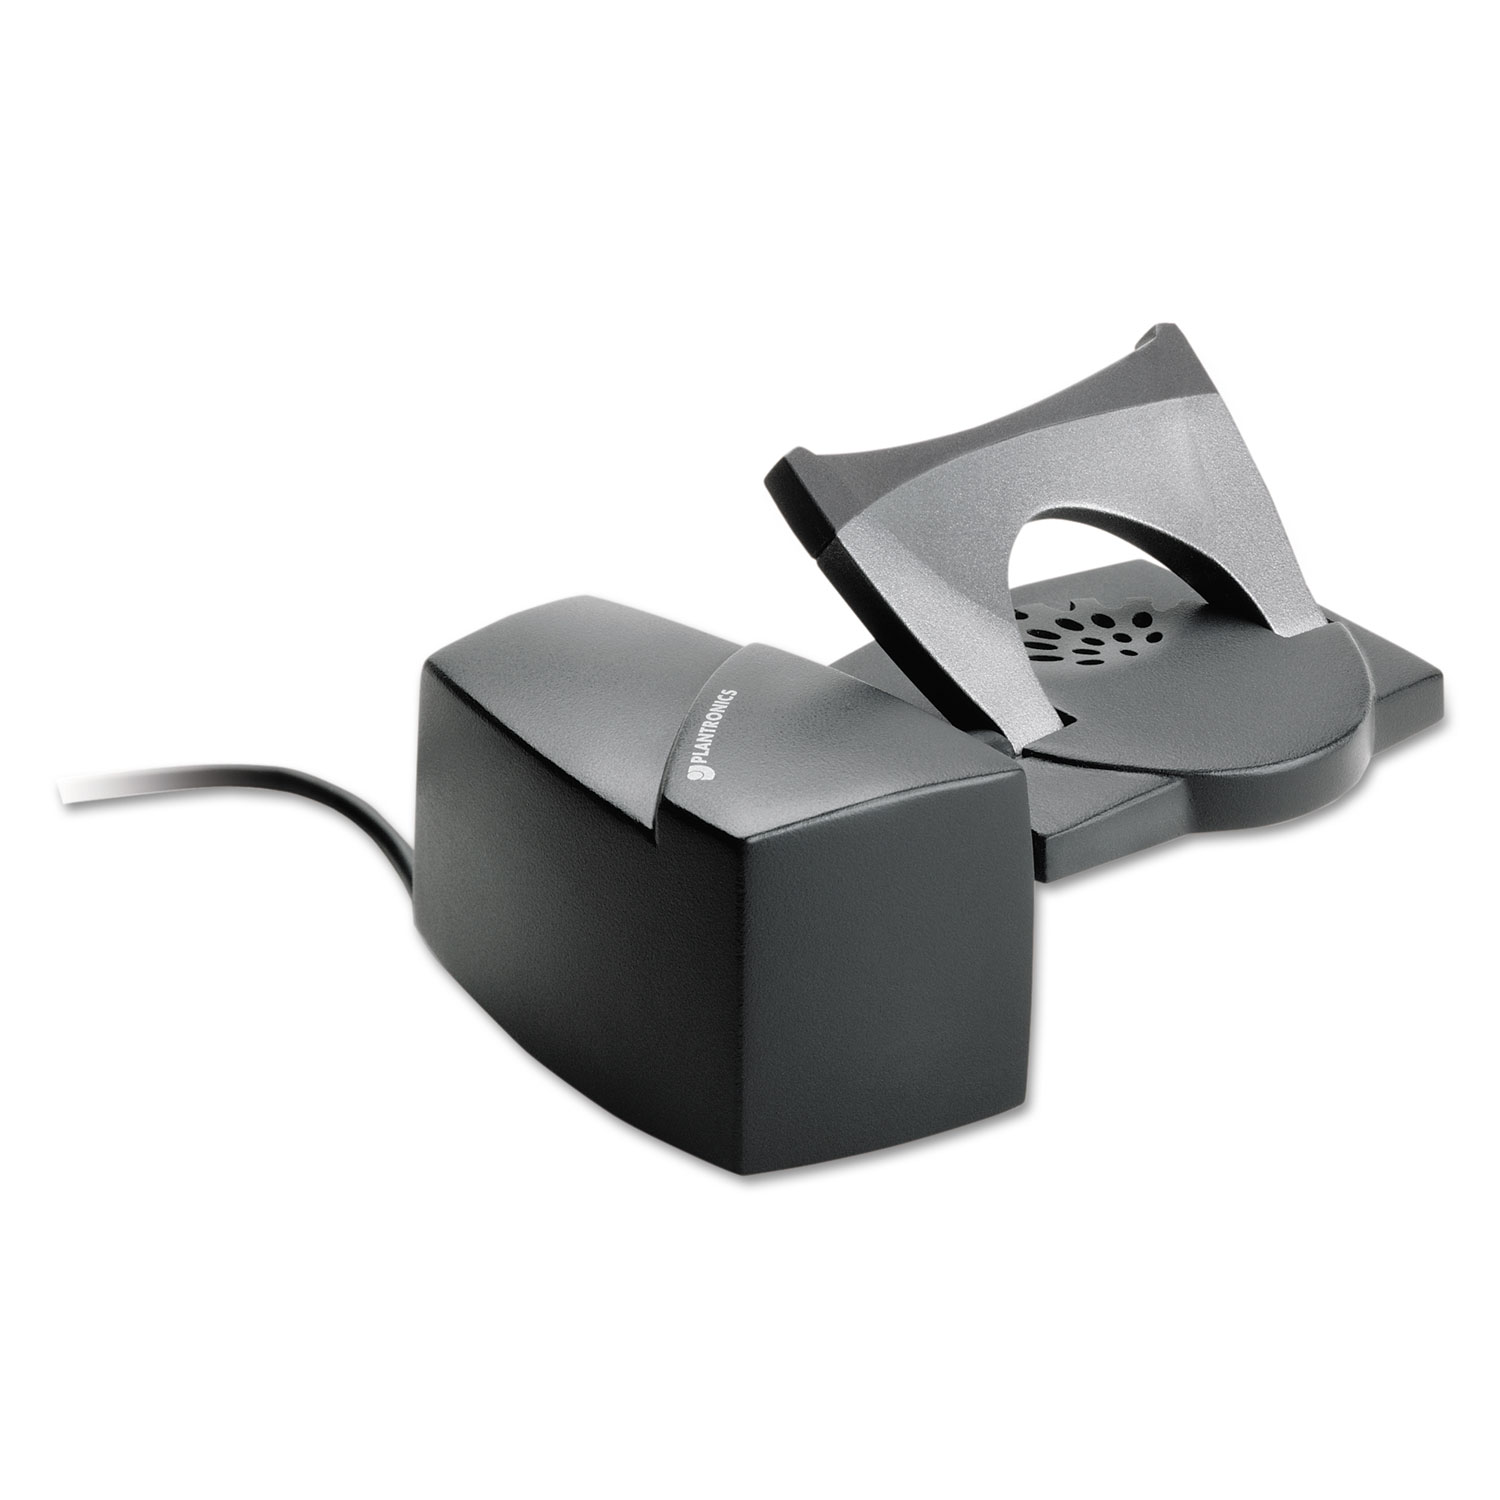 Handset Lifter for Use with Plantronics Cordless Headset Systems